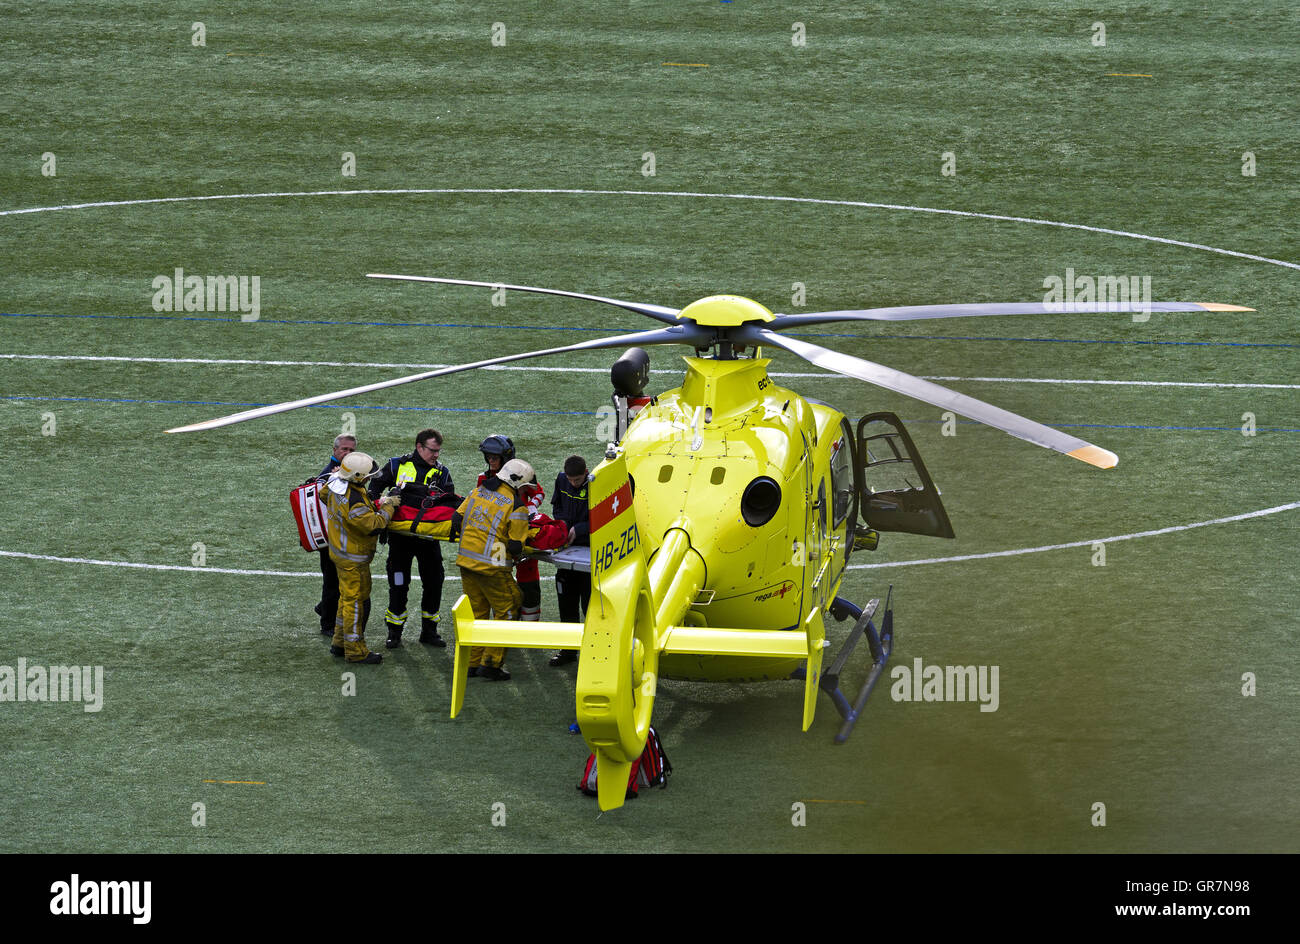 Rescue Workers Carrying A Casualty To A Rescue Helicopter, Geneva, Switzerland Stock Photo